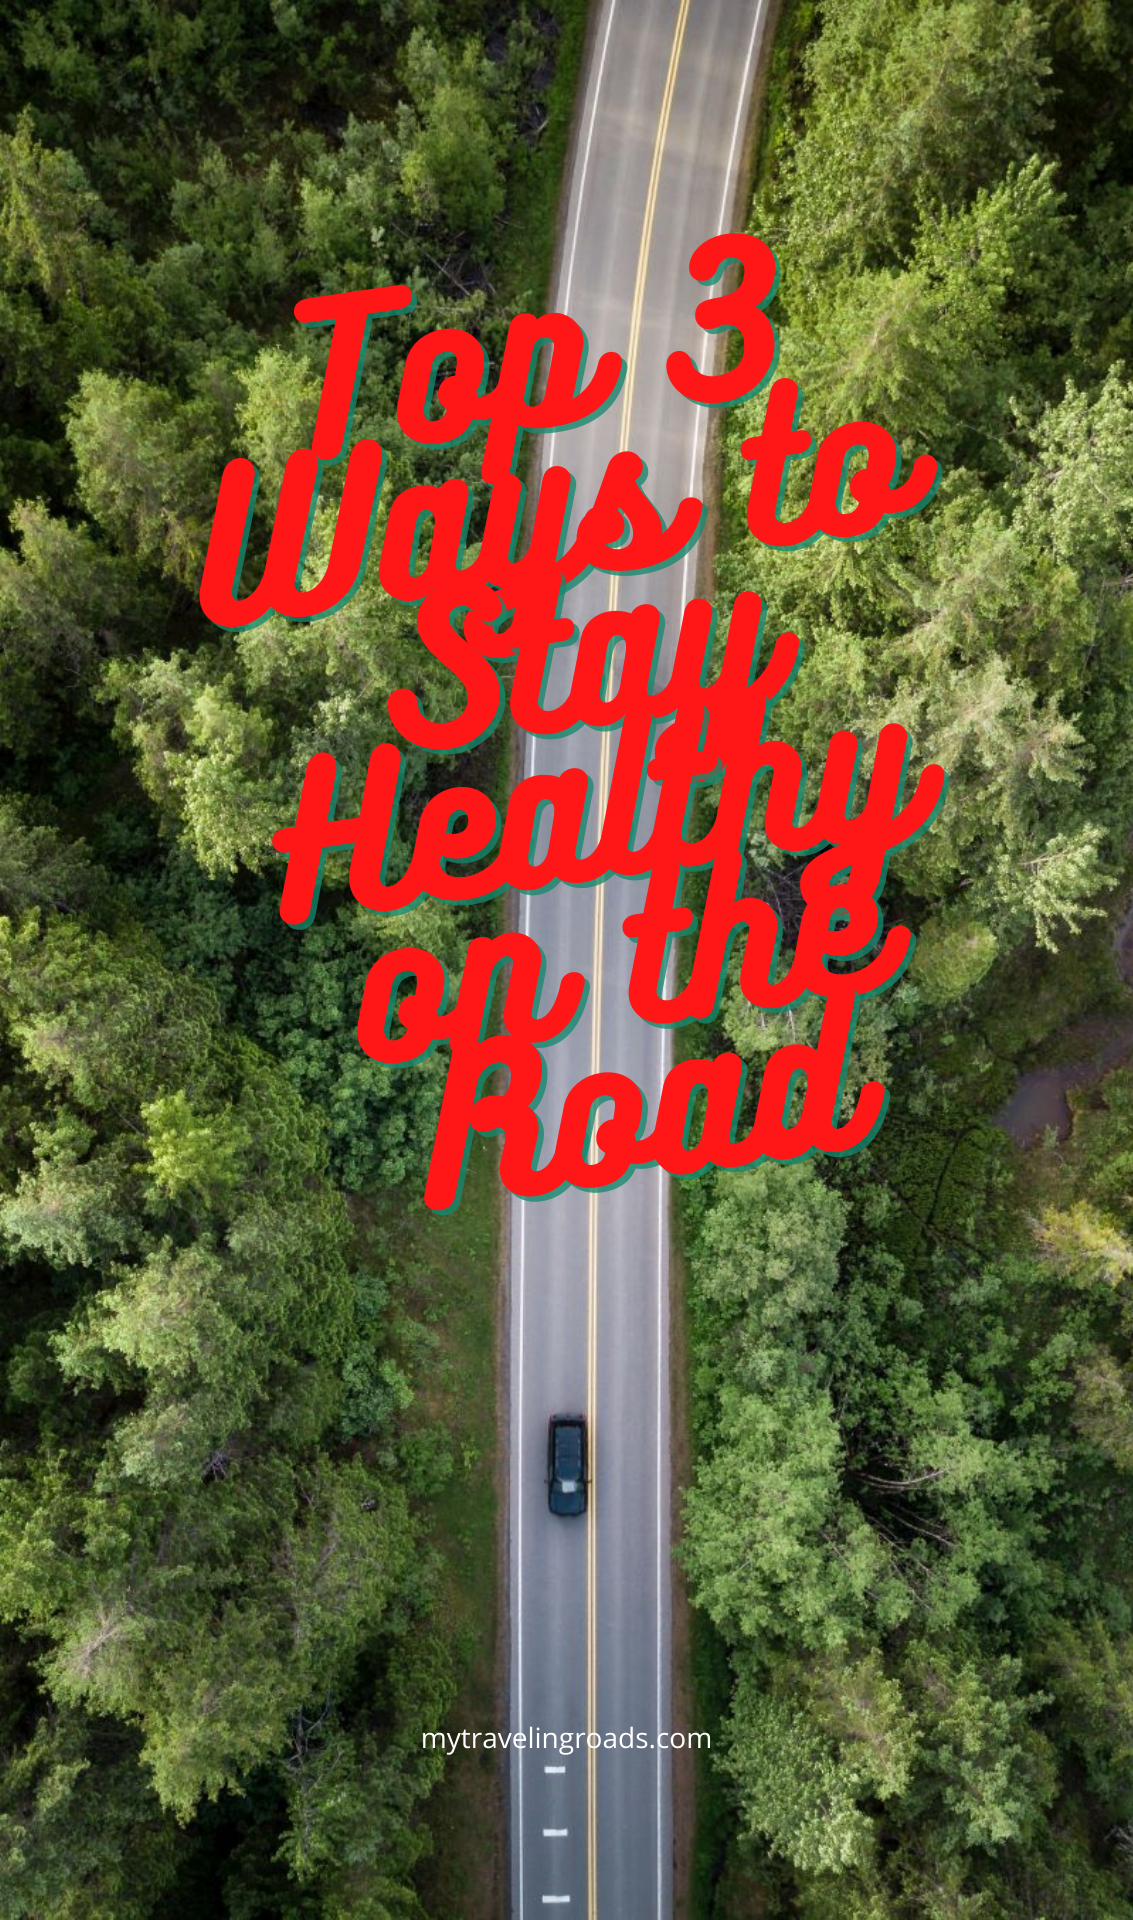 Top 3 Ways to Stay Healthy on the Road